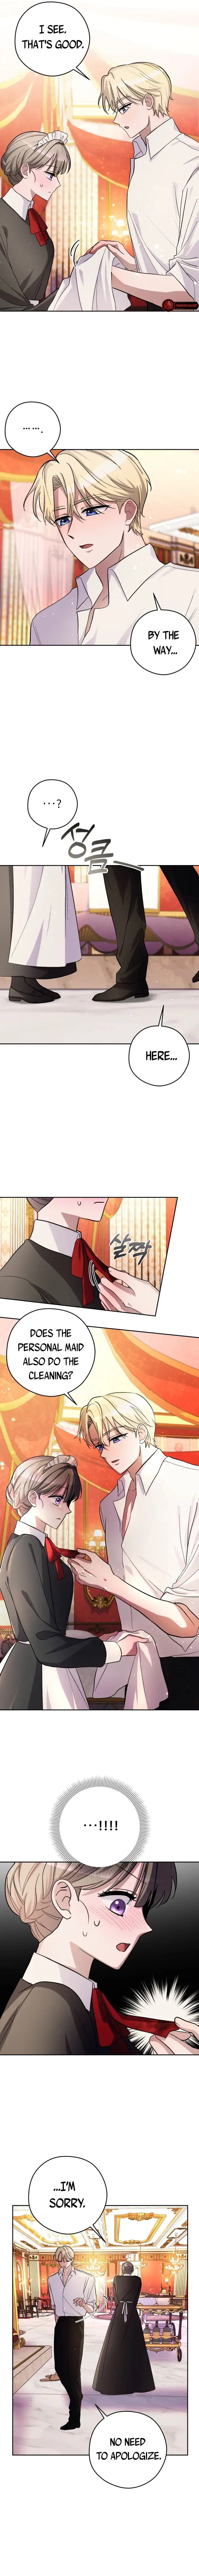 The Maid With A Dictator On A Leash Chapter 7 - Page 4